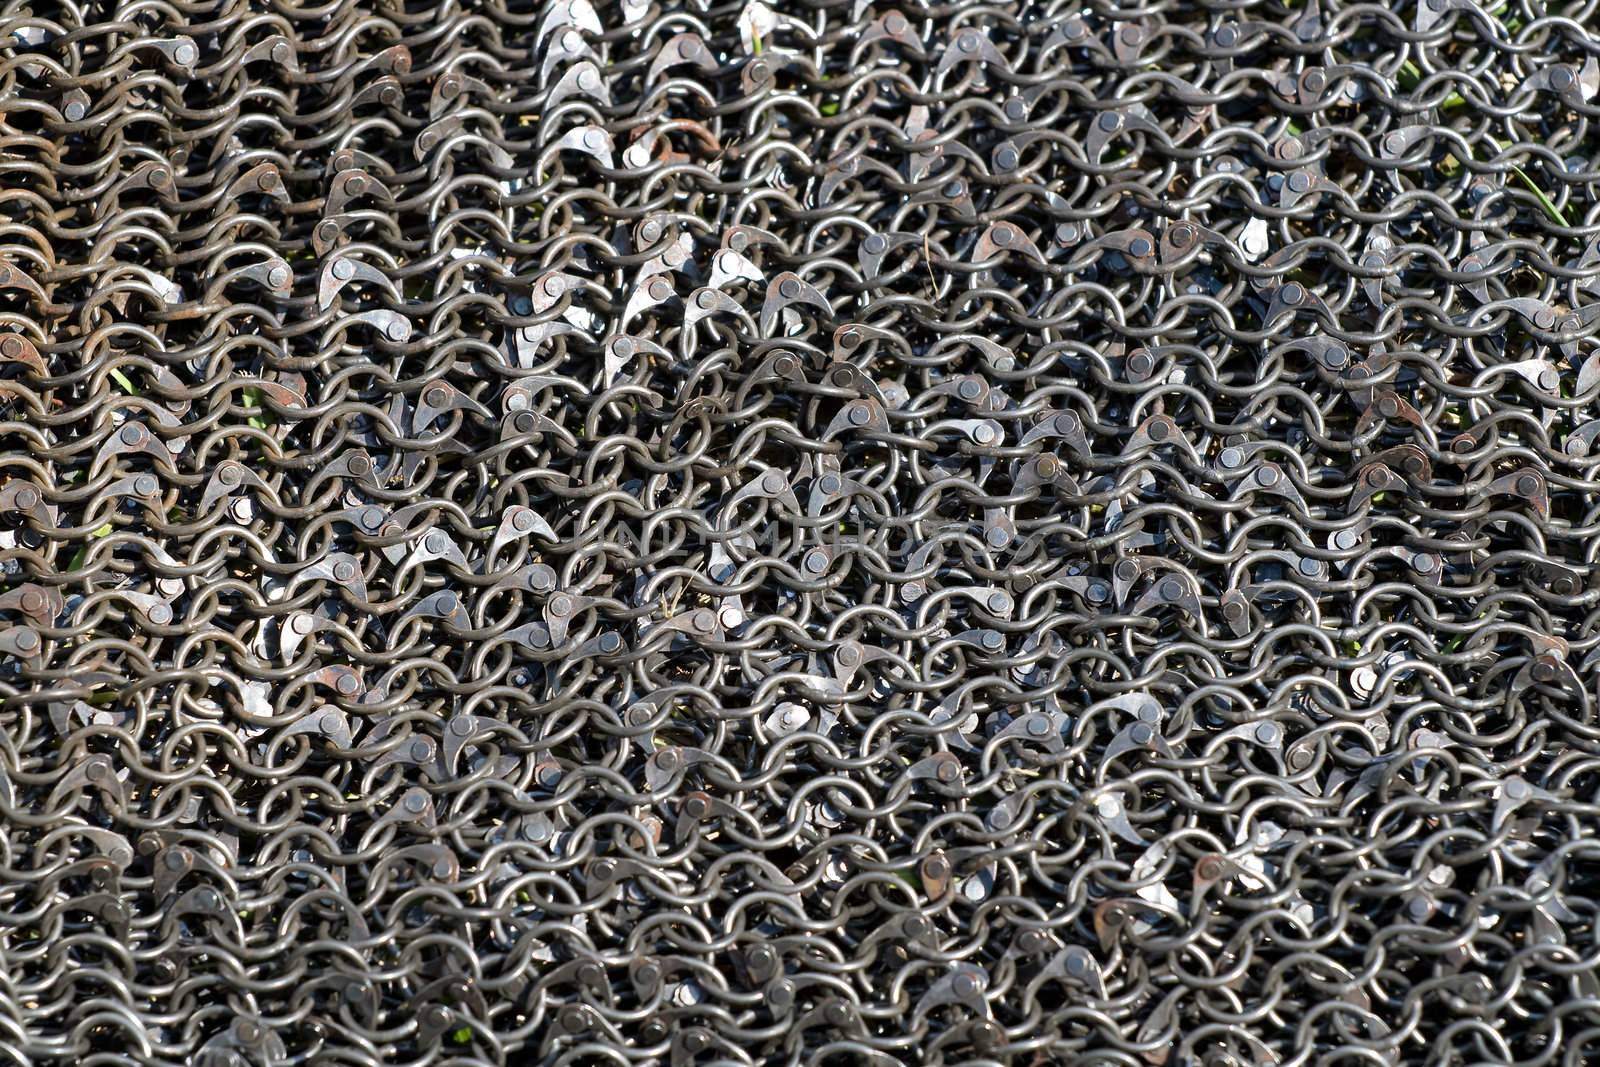 Background of medieval armour made from metal rings